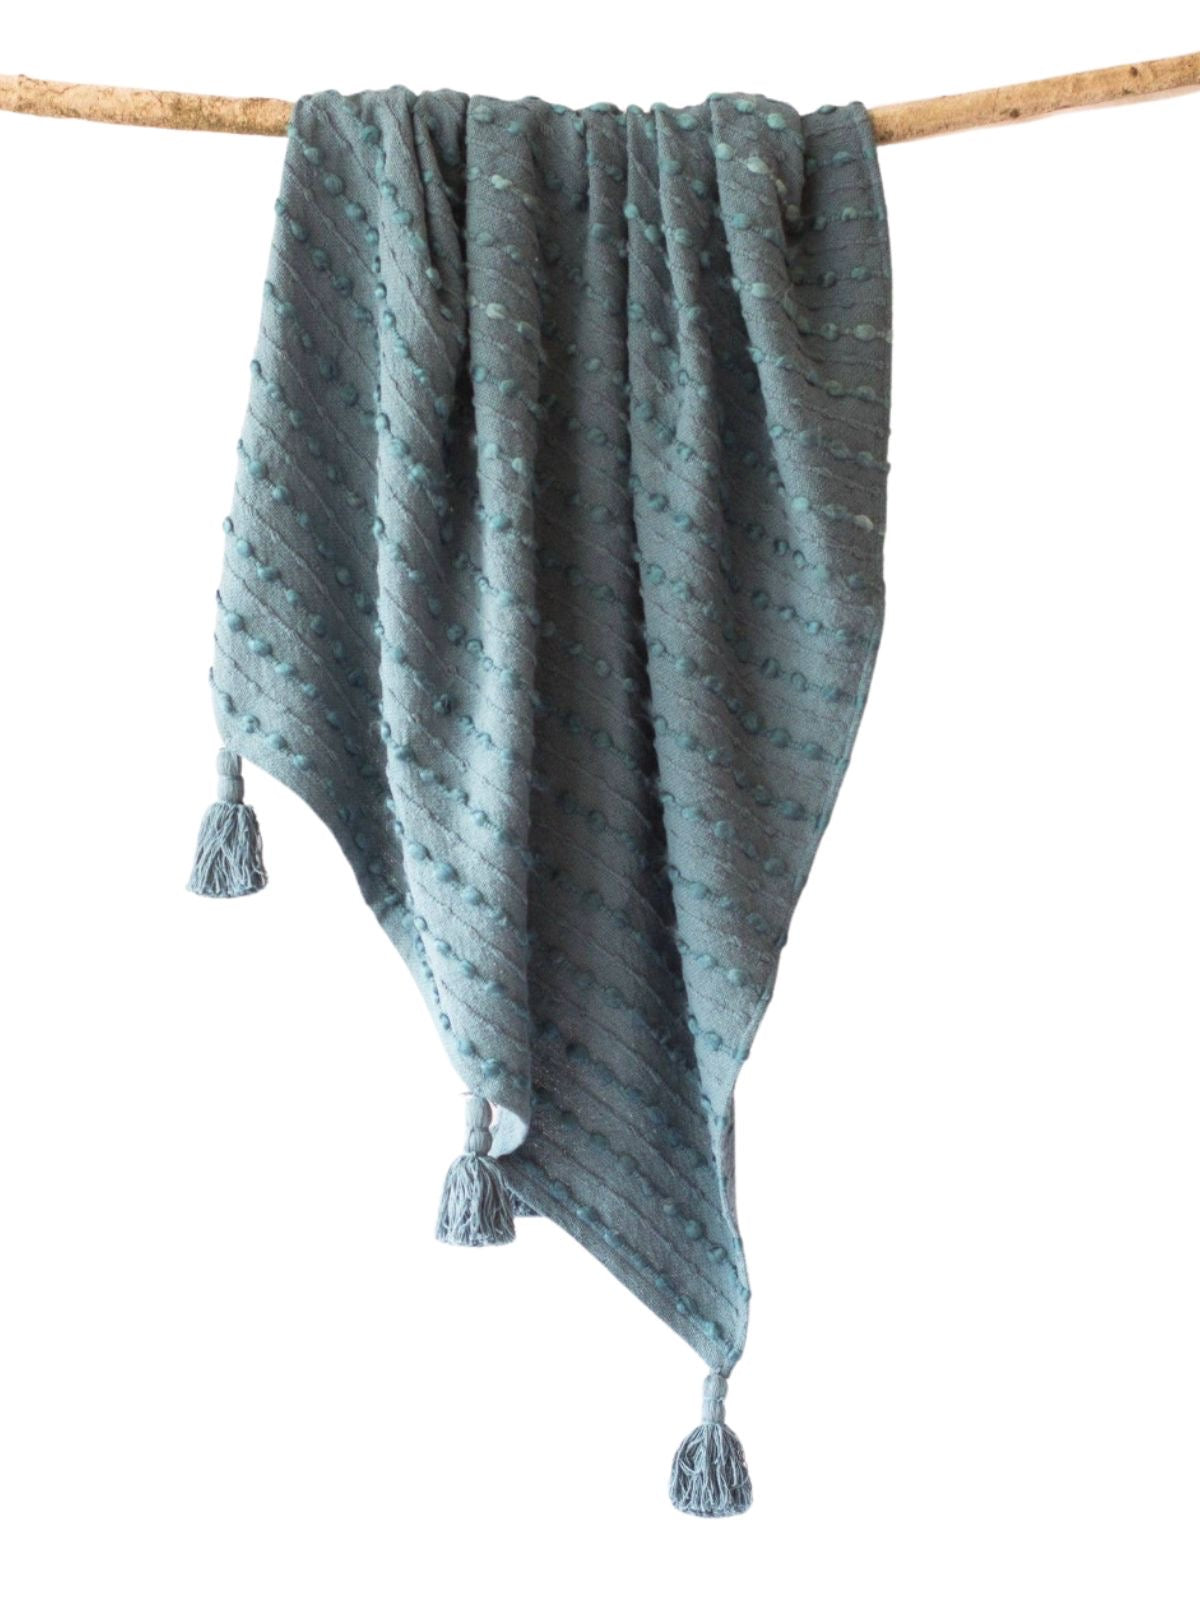 Decorative Throw Blankets Made with 80% Handwoven Cotton and 20% Acrylic Blue Hand-dyed Color, 50W x 60L.